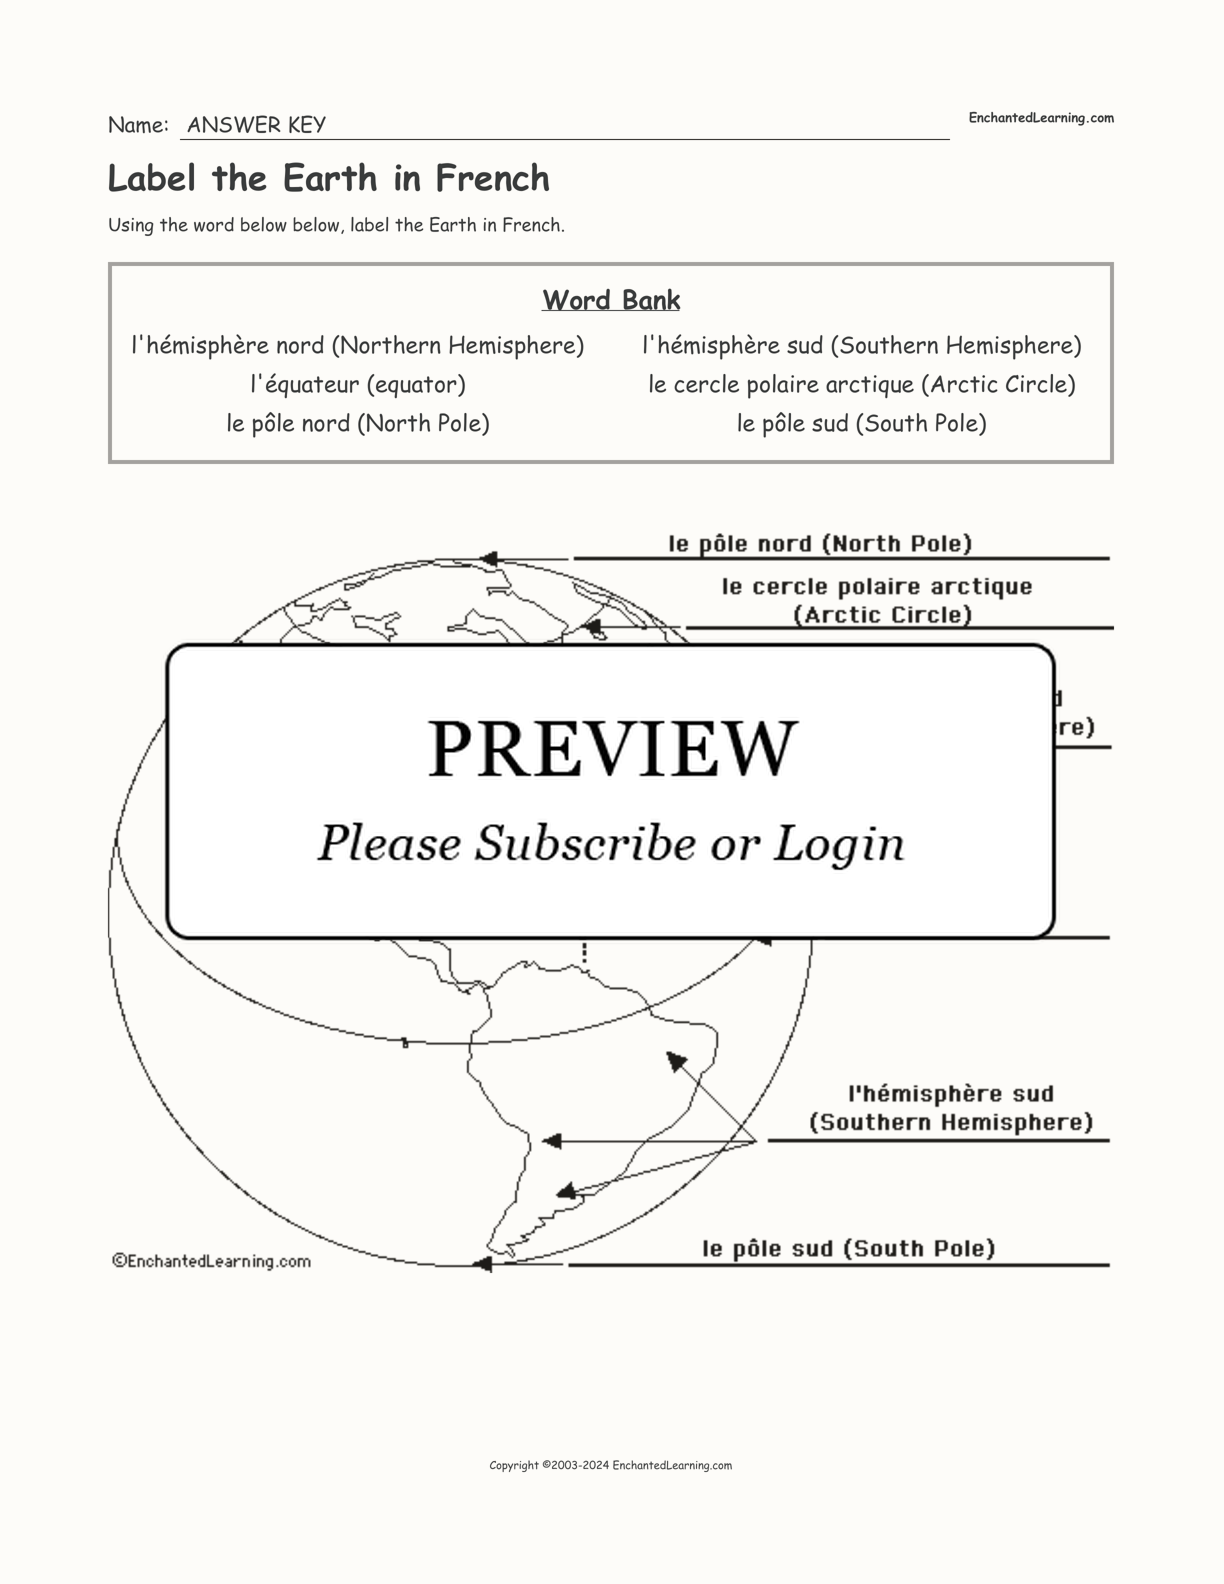 Label the Earth in French interactive worksheet page 2